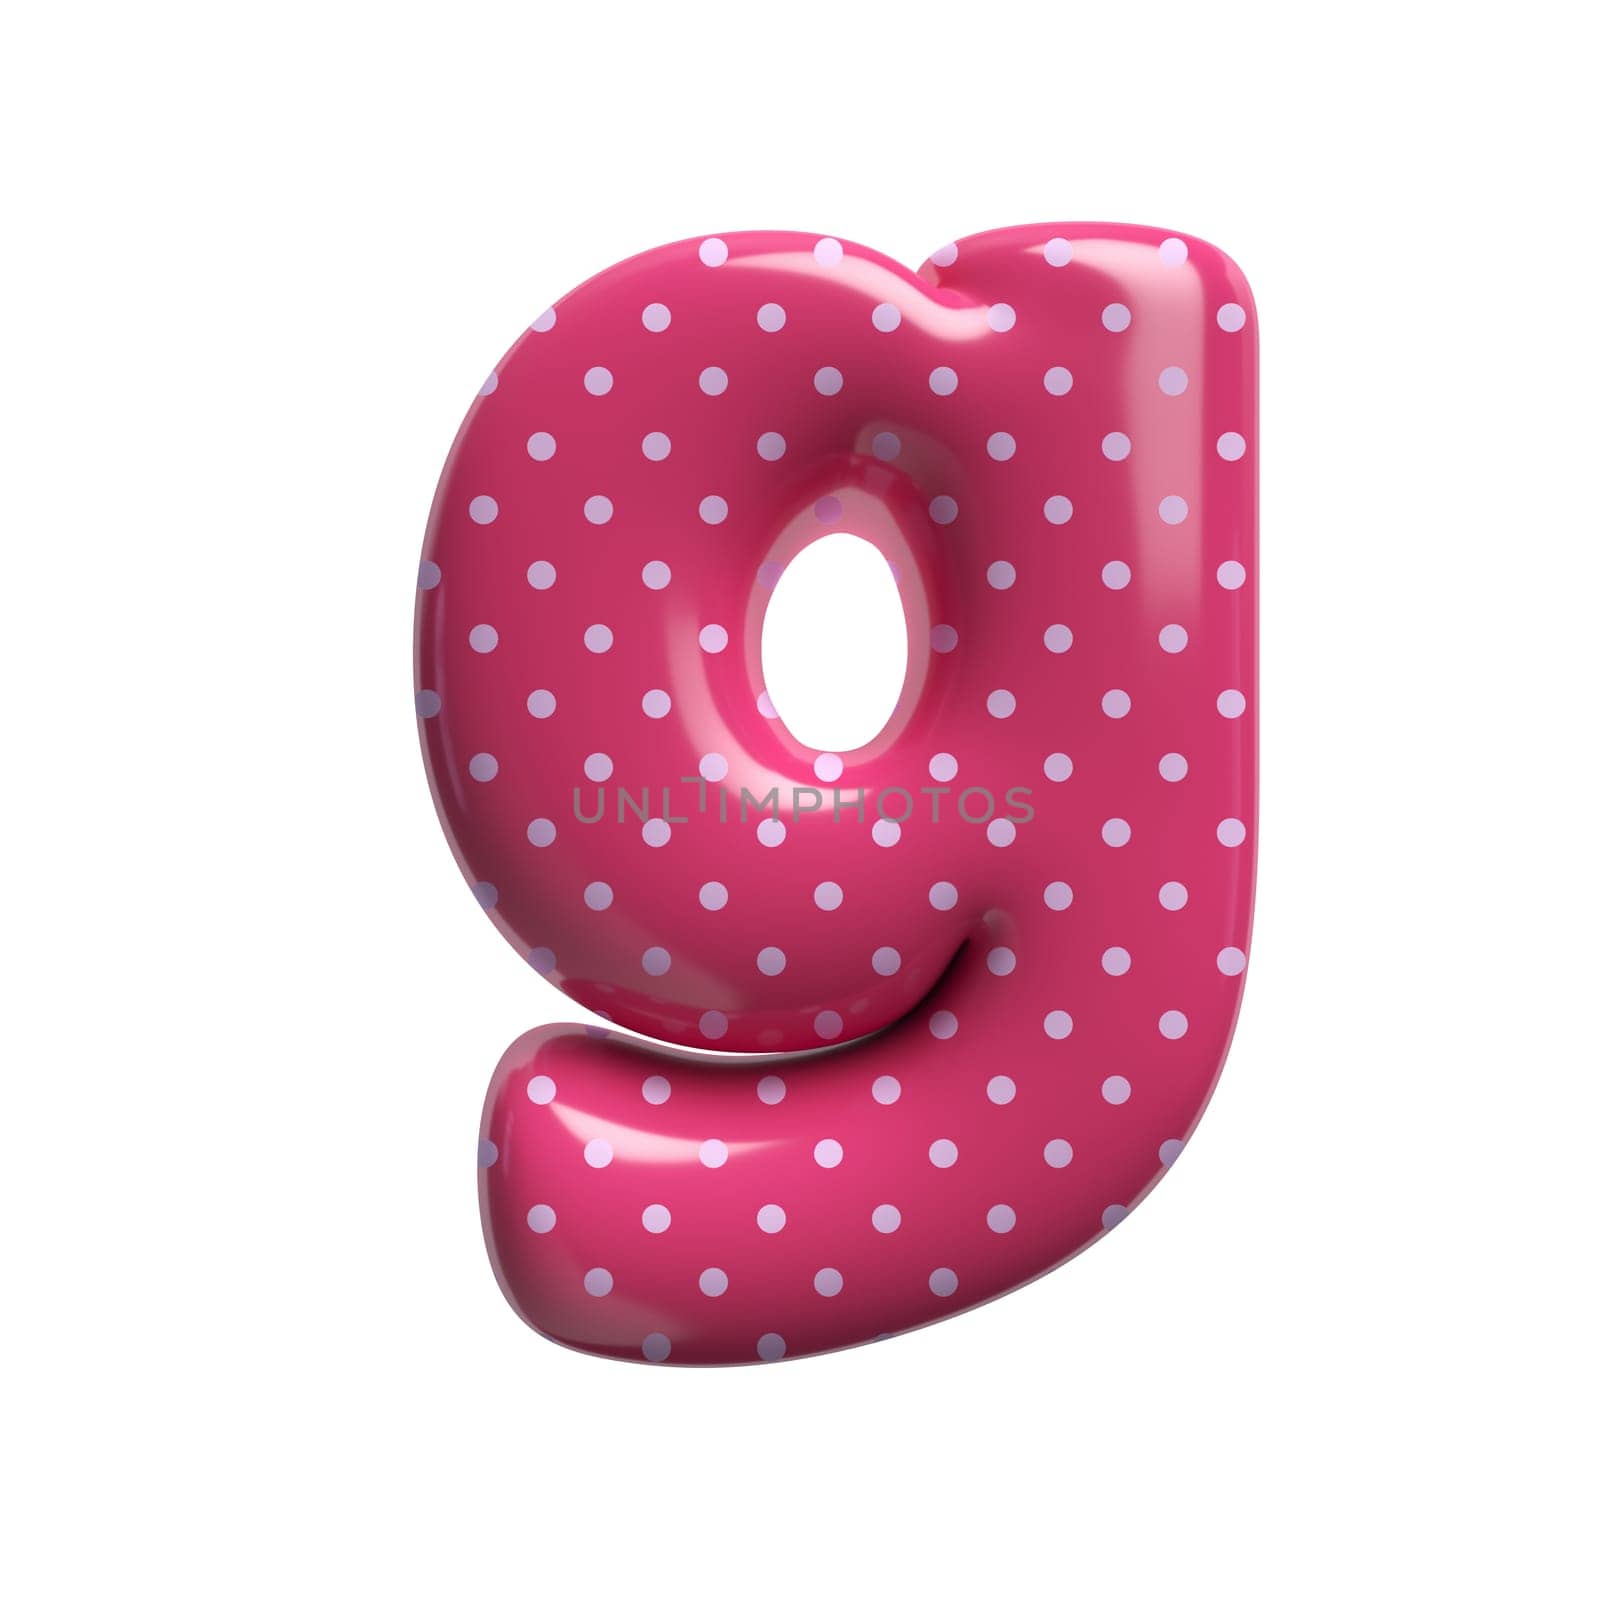 Polka dot letter G - Small 3d pink retro font - Suitable for Fashion, retro design or decoration related subjects by chrisroll